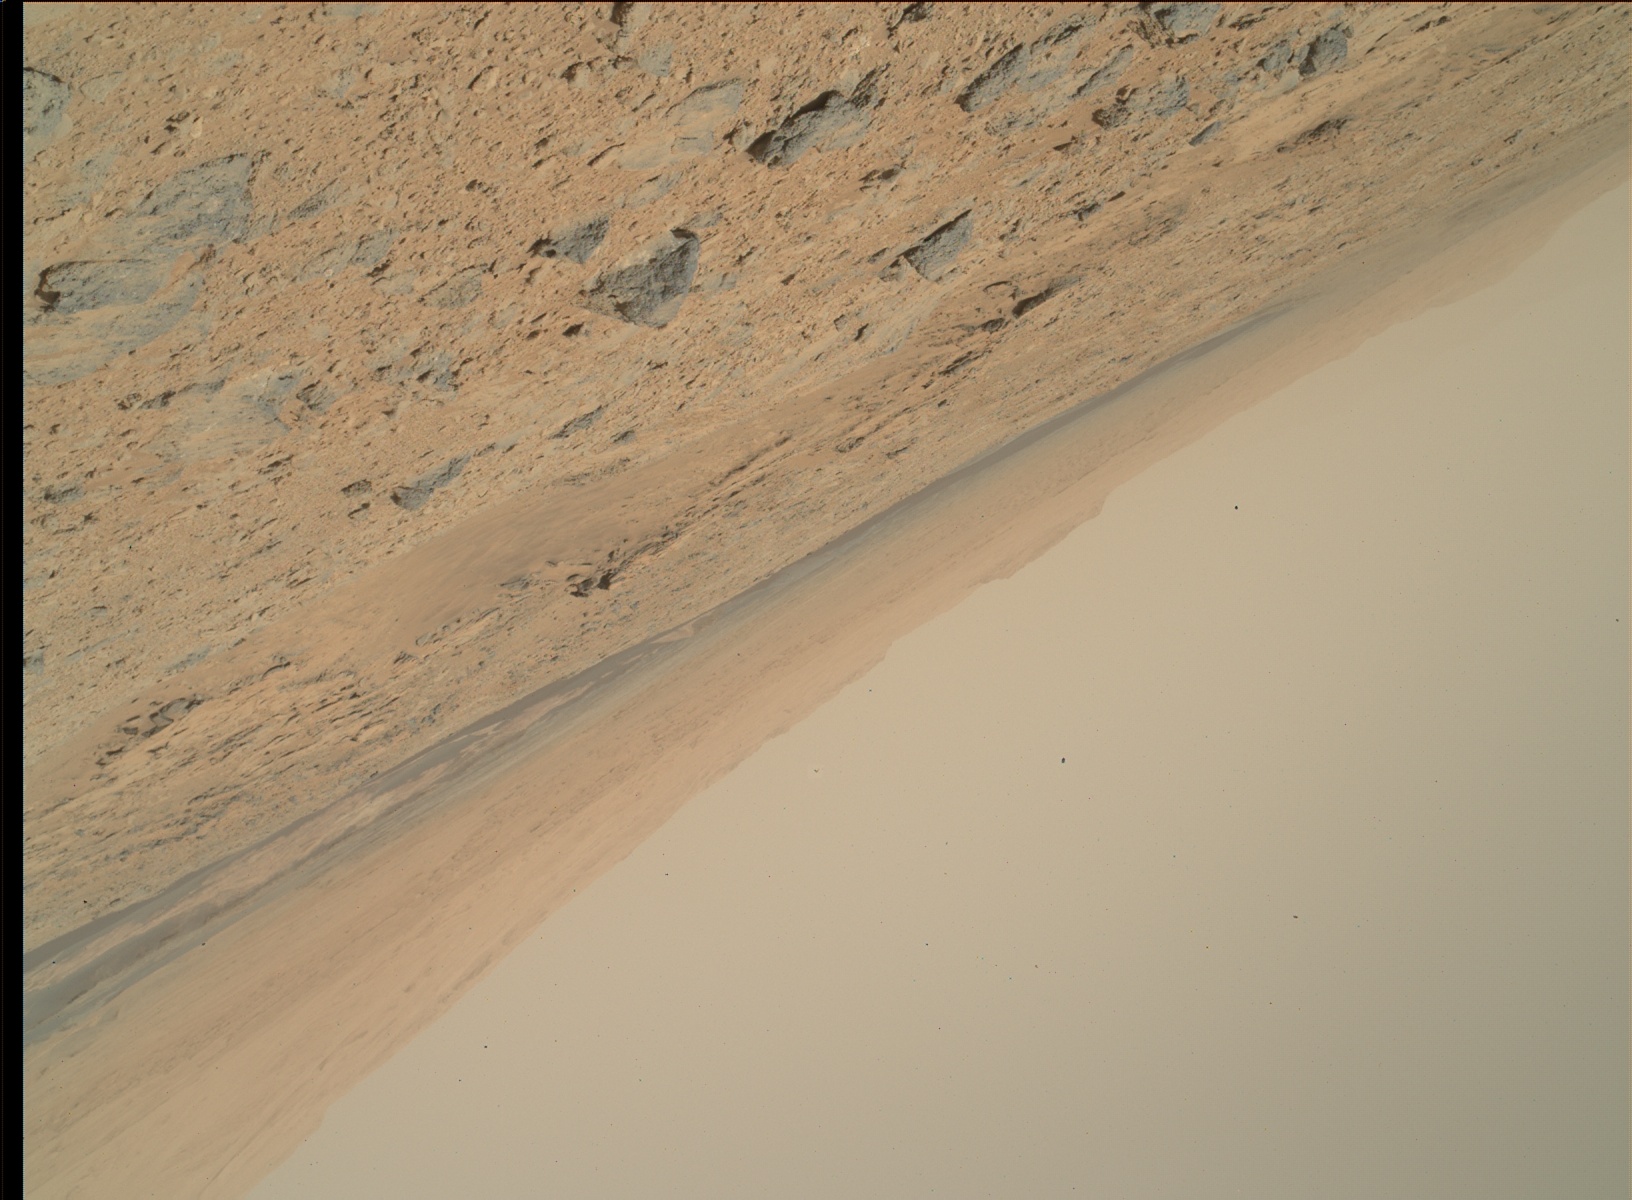 Nasa's Mars rover Curiosity acquired this image using its Mars Hand Lens Imager (MAHLI) on Sol 437